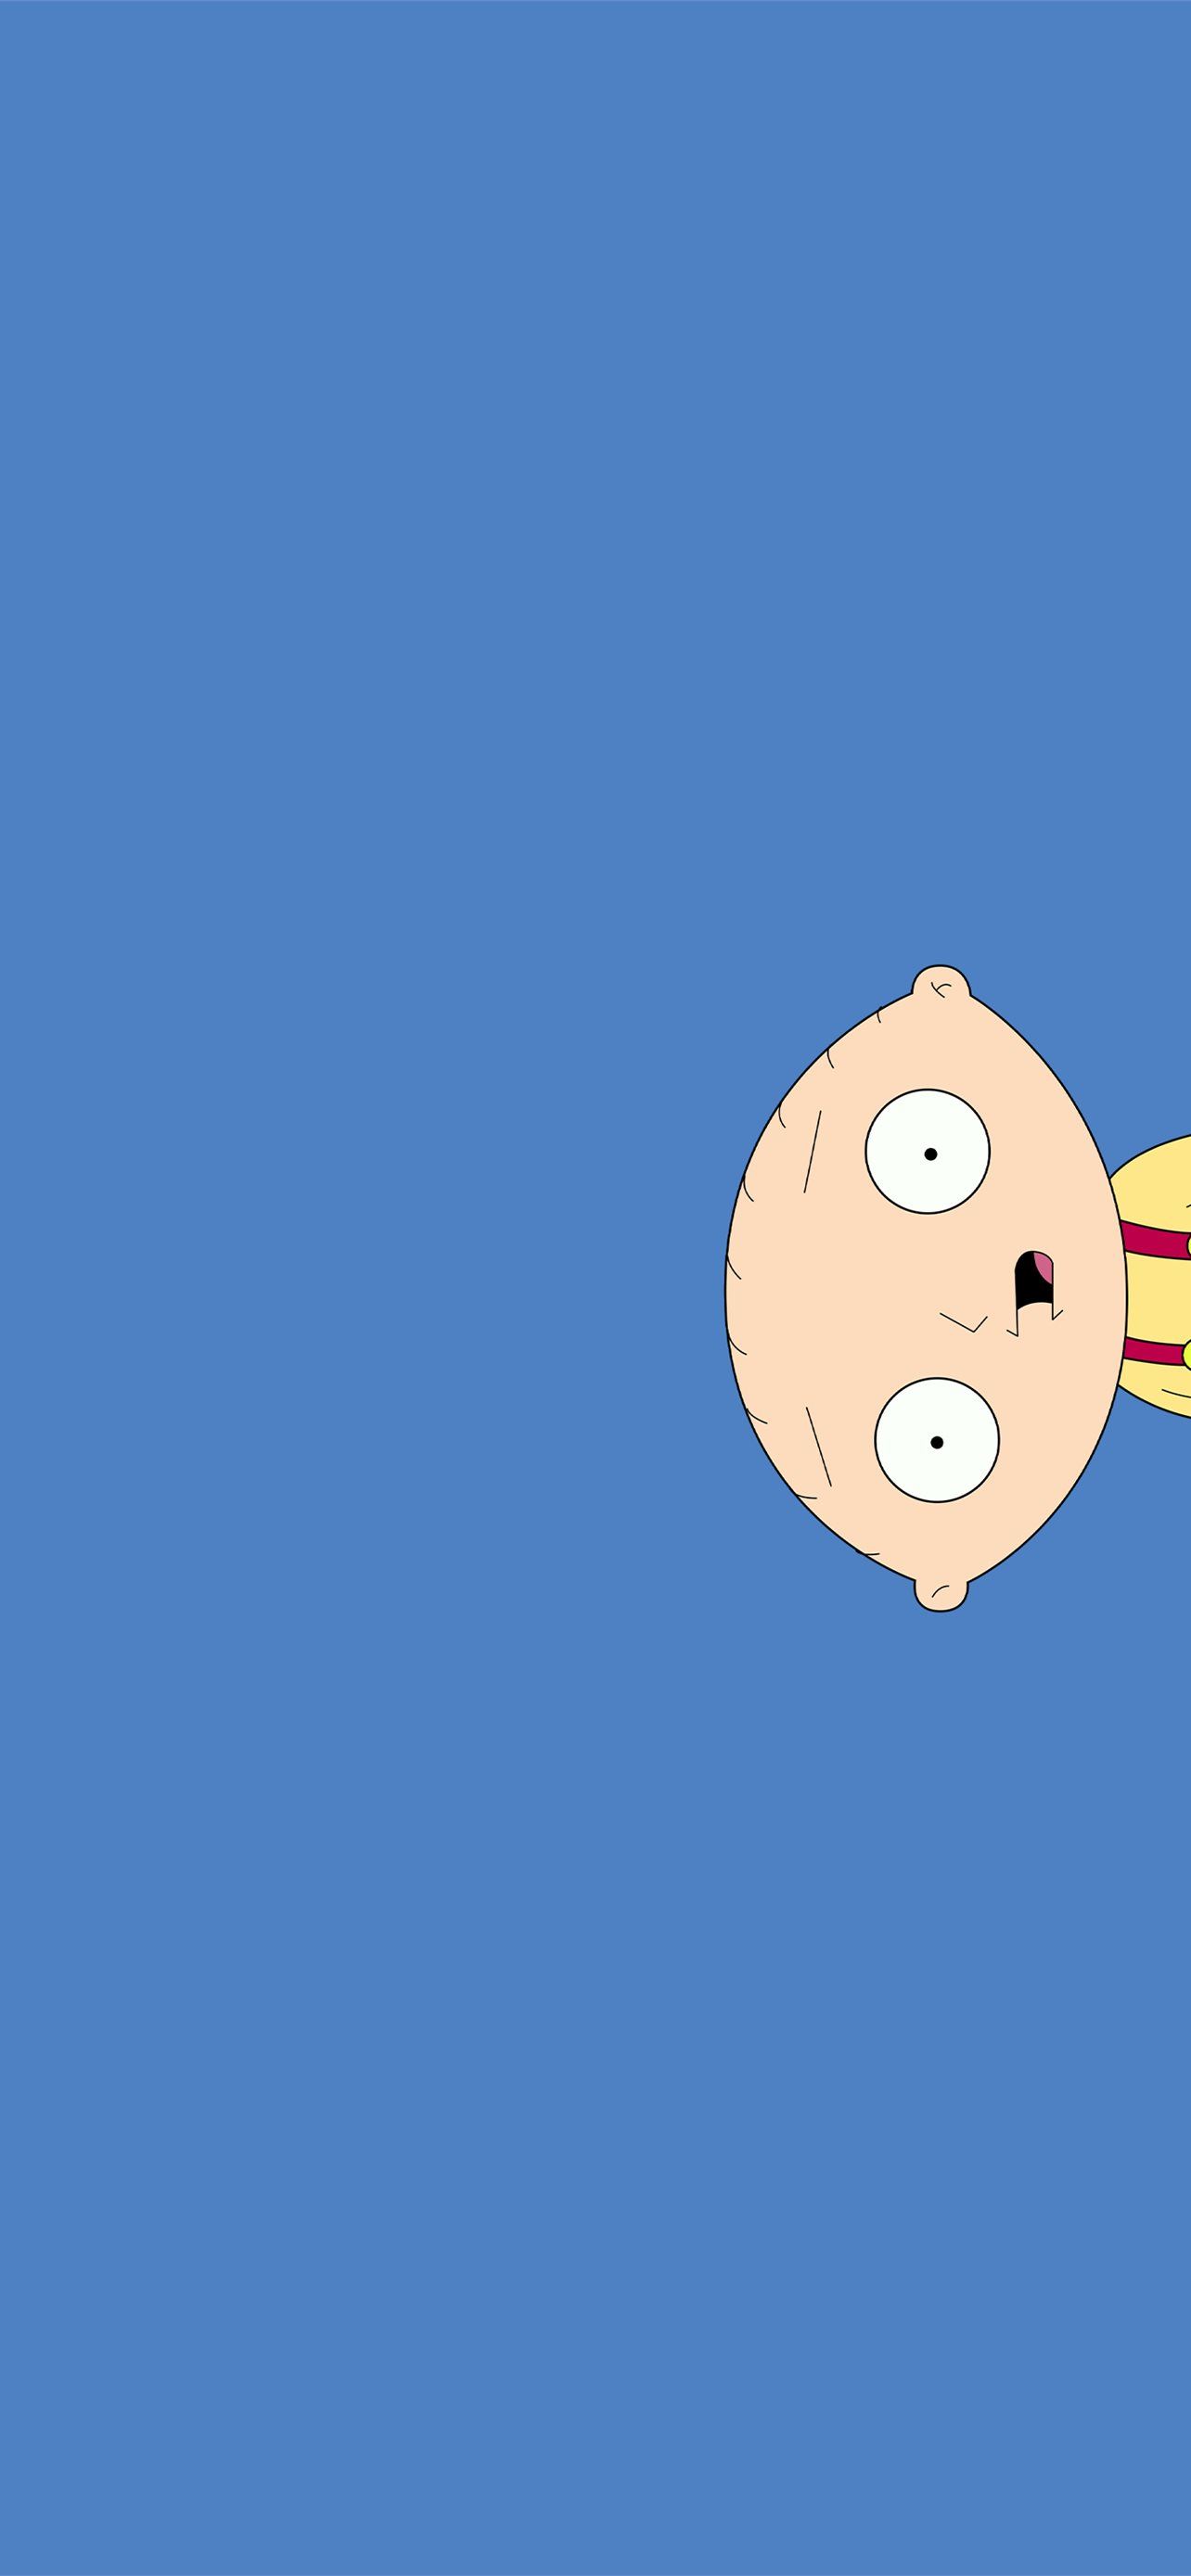 Family Guy Stewie Album On Imgur Iphone Wallpapers Free Download